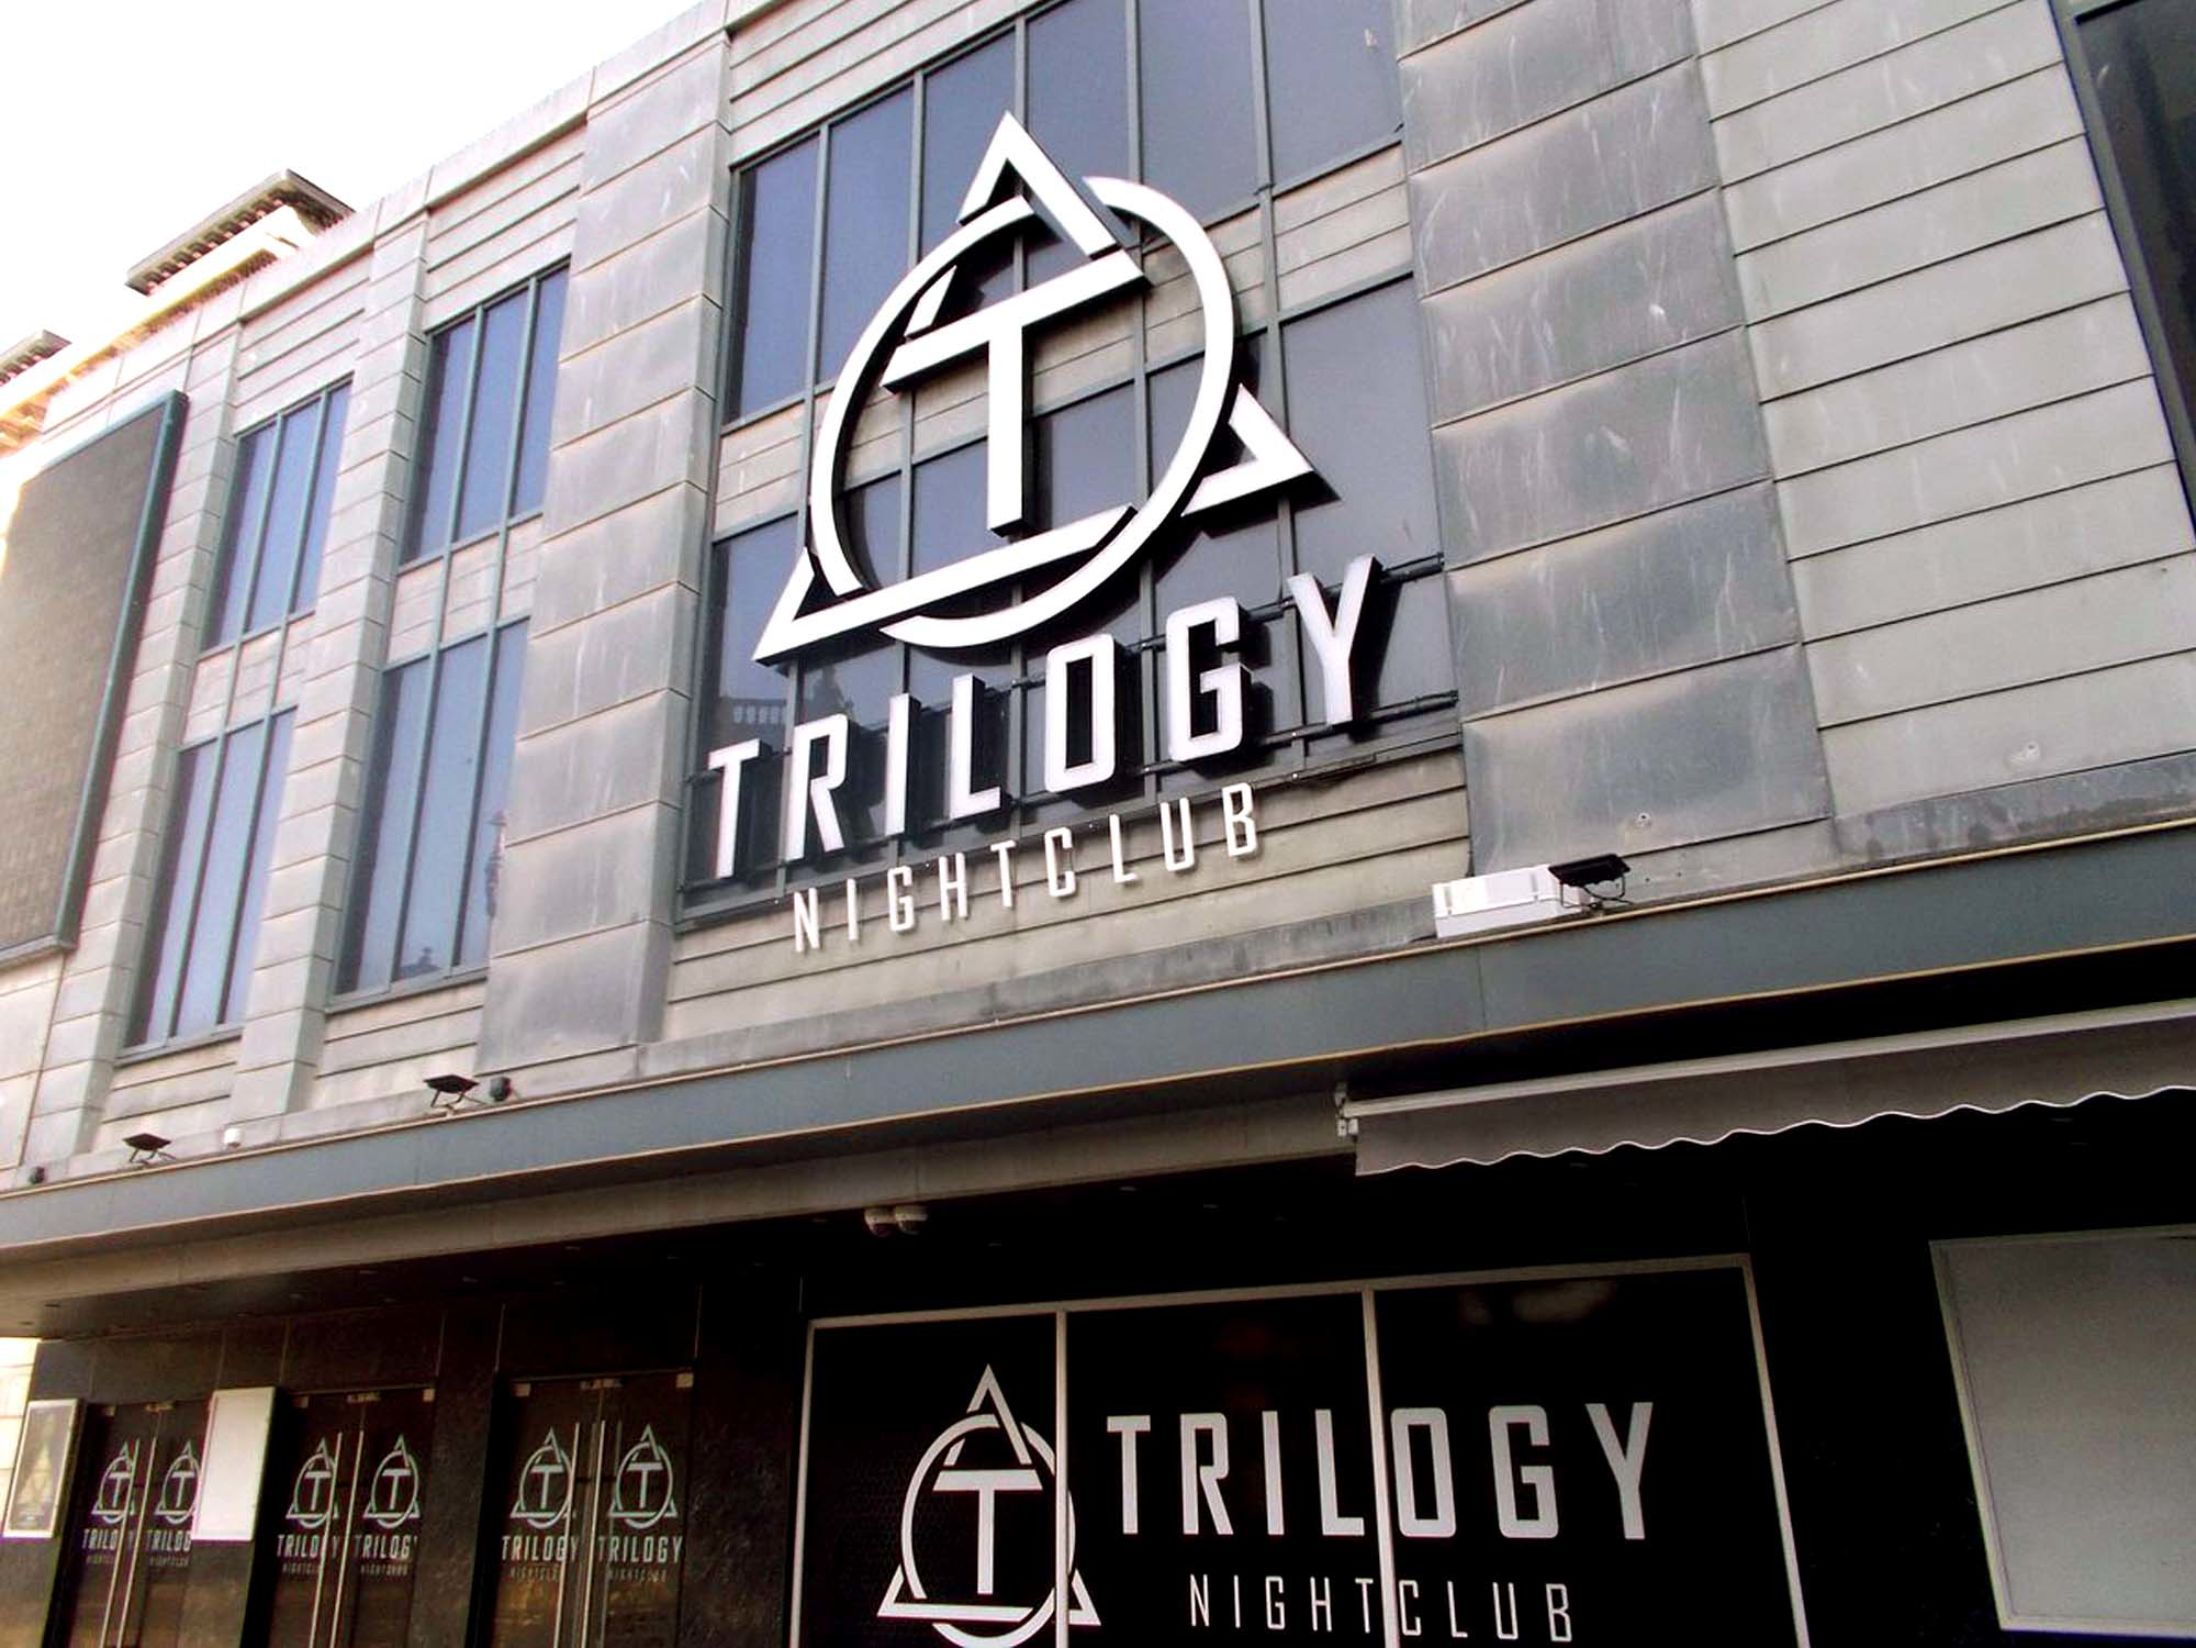 Best Clubs in Blackpool - Trilogy Club